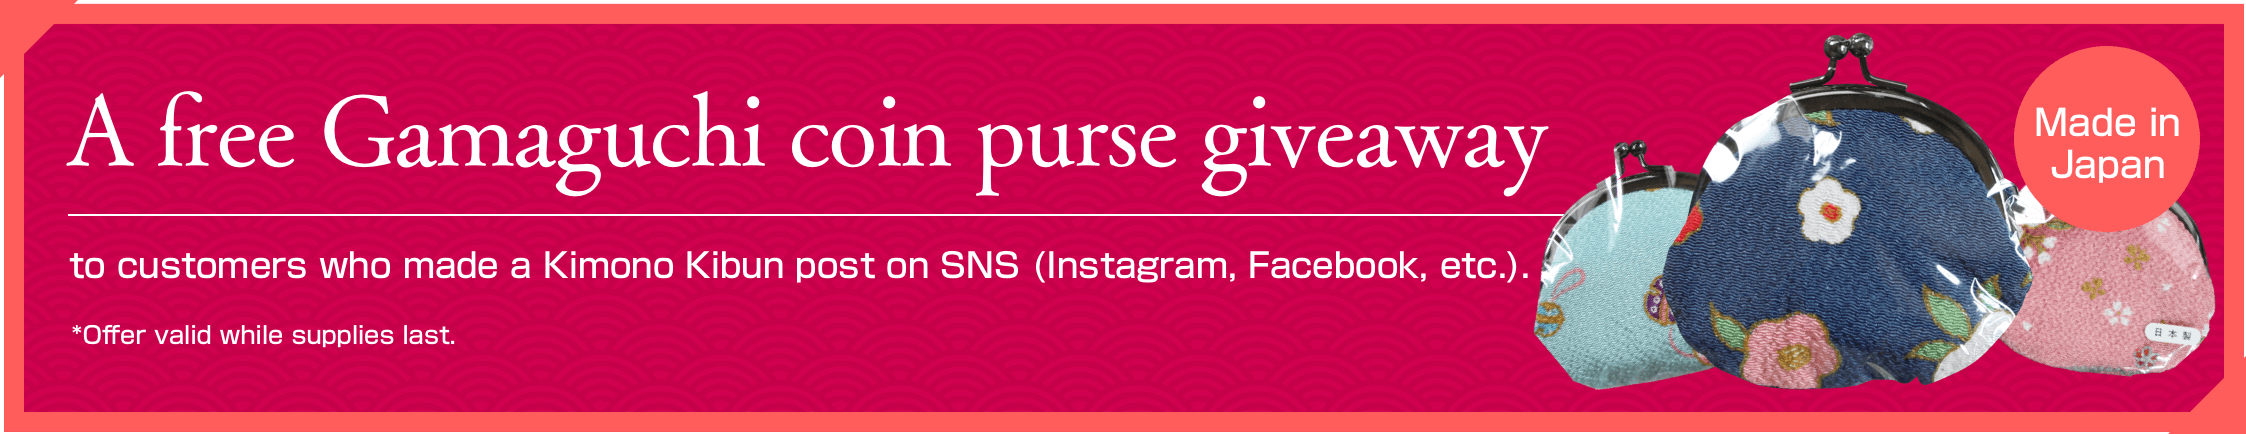 A free Gamaguchi coin purse giveaway to customers who made a Kimono Kibun post on SNS (Instagram, Facebook, etc.). *Offer valid while supplies last.